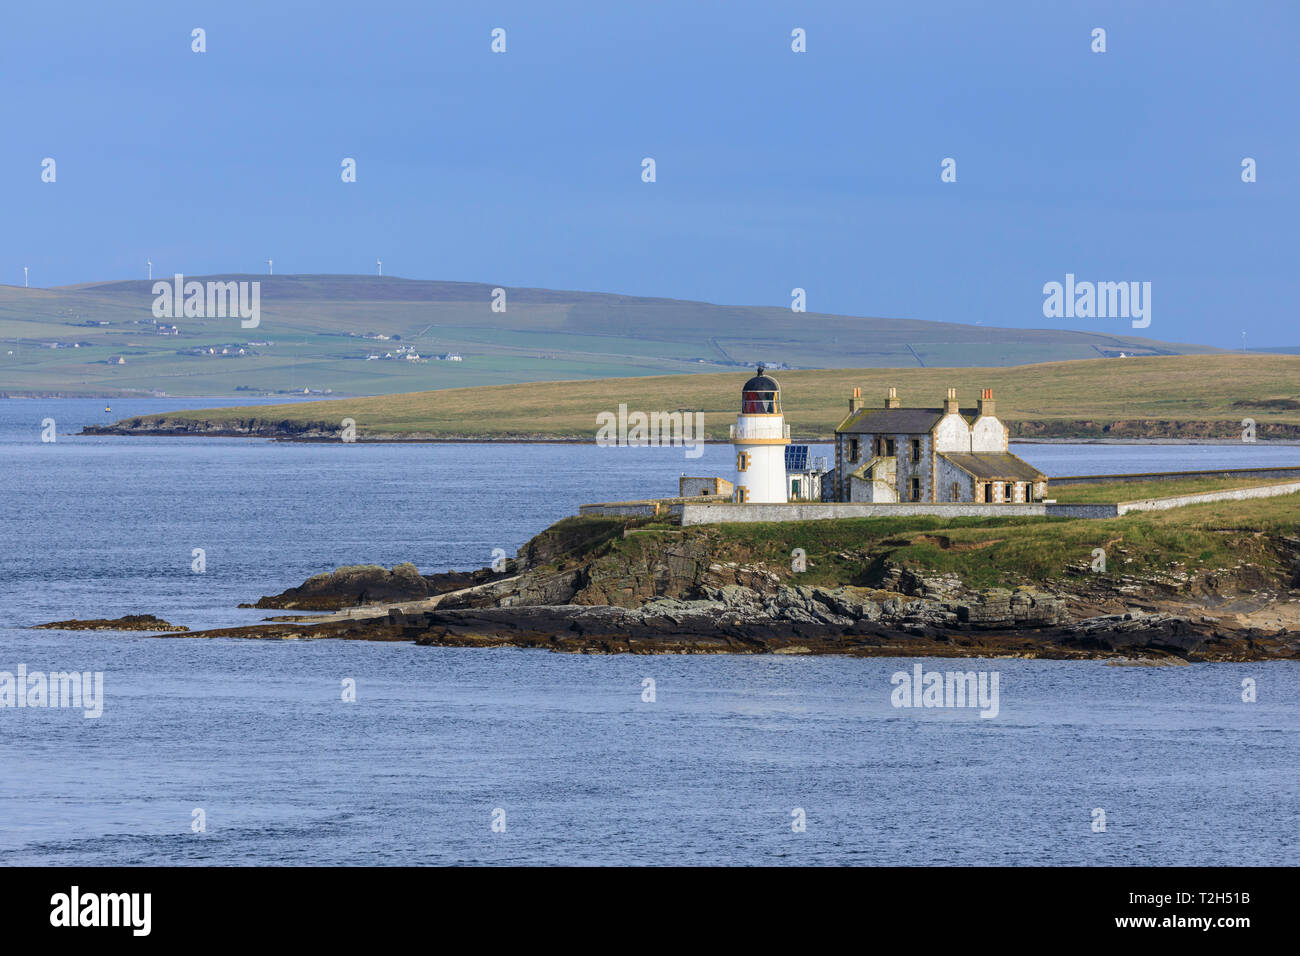 Lighthouse on Helliar Holm in Orkney Islands, Scotland, Europe Stock Photo